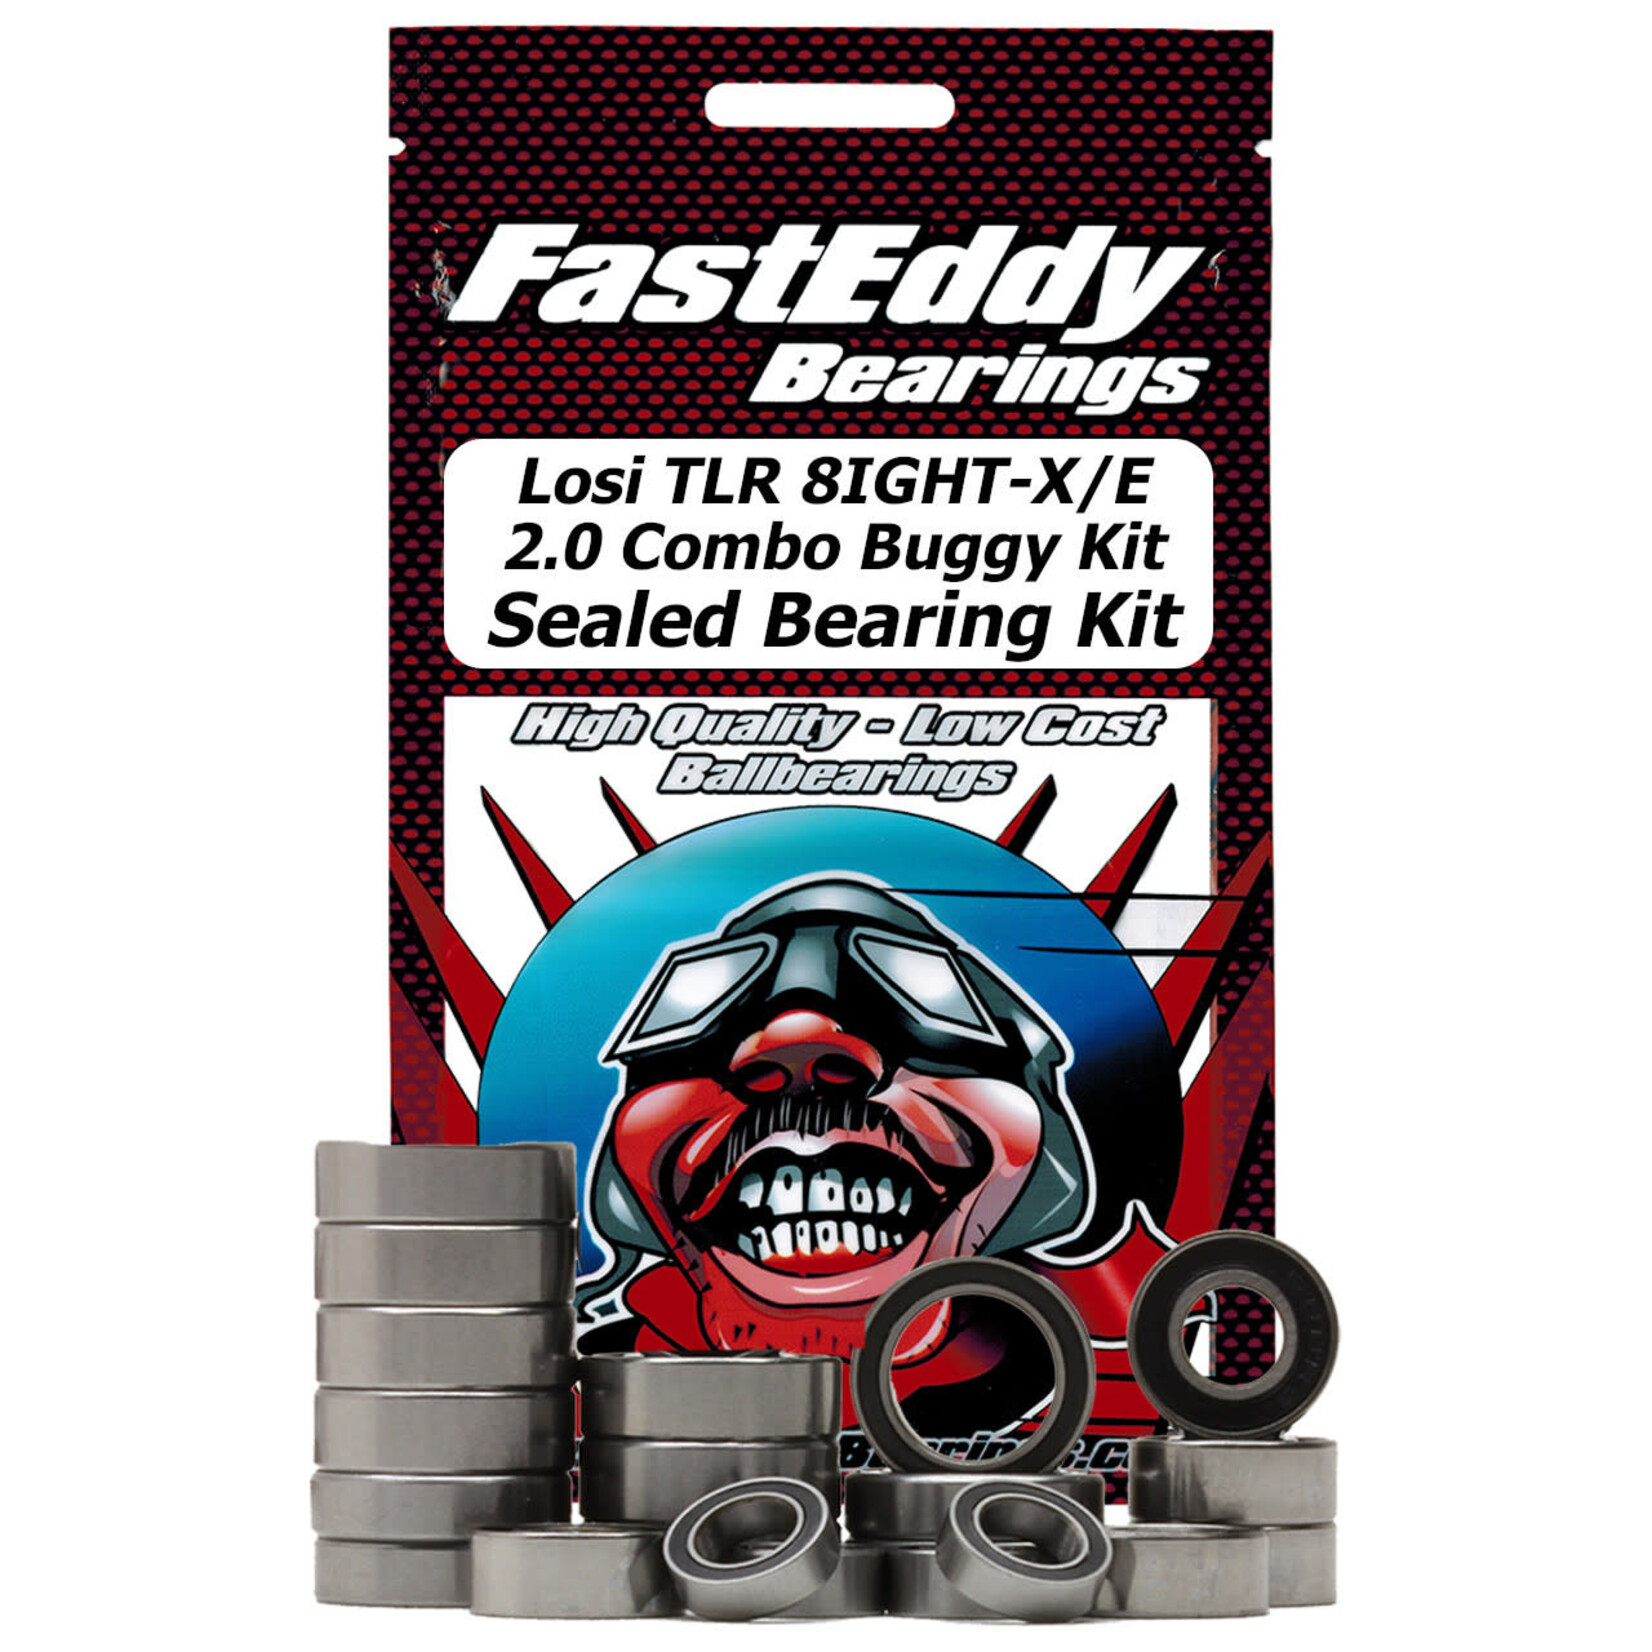 FastEddy FastEddy Bearings Losi TLR 8IGHT-X/E 2.0 Combo Buggy Kit Sealed Bearing Kit #TFE8586